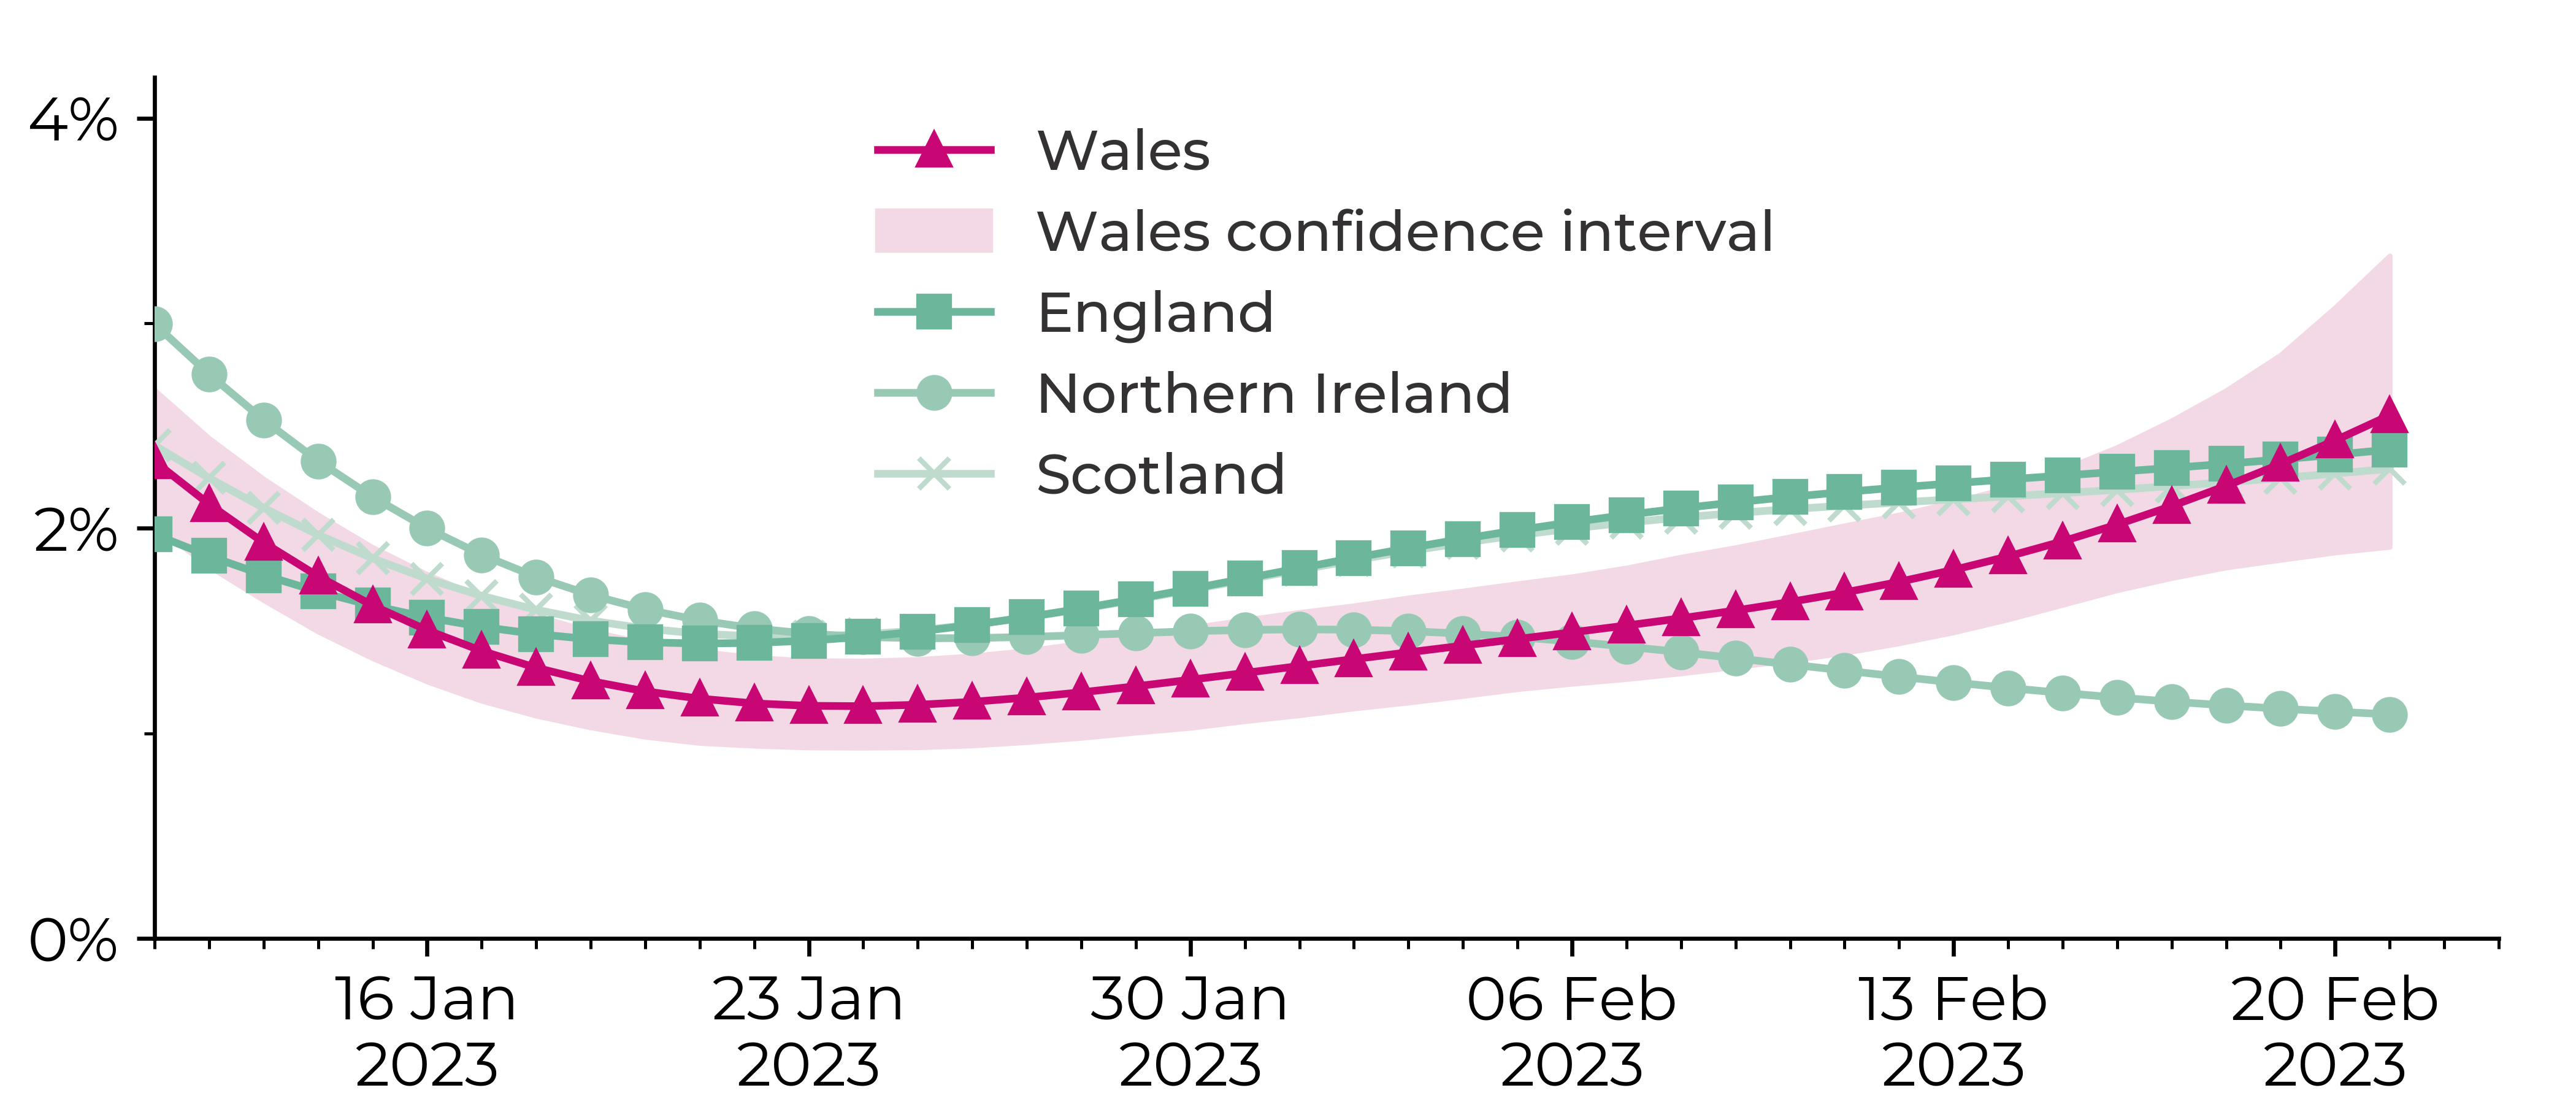 Graph showing overall decreases for all UK nations from between 3.4% and 6.8% on 21 December 2022 to around 1-2% on 20 February 2023. Trends for the most recent week are described below.